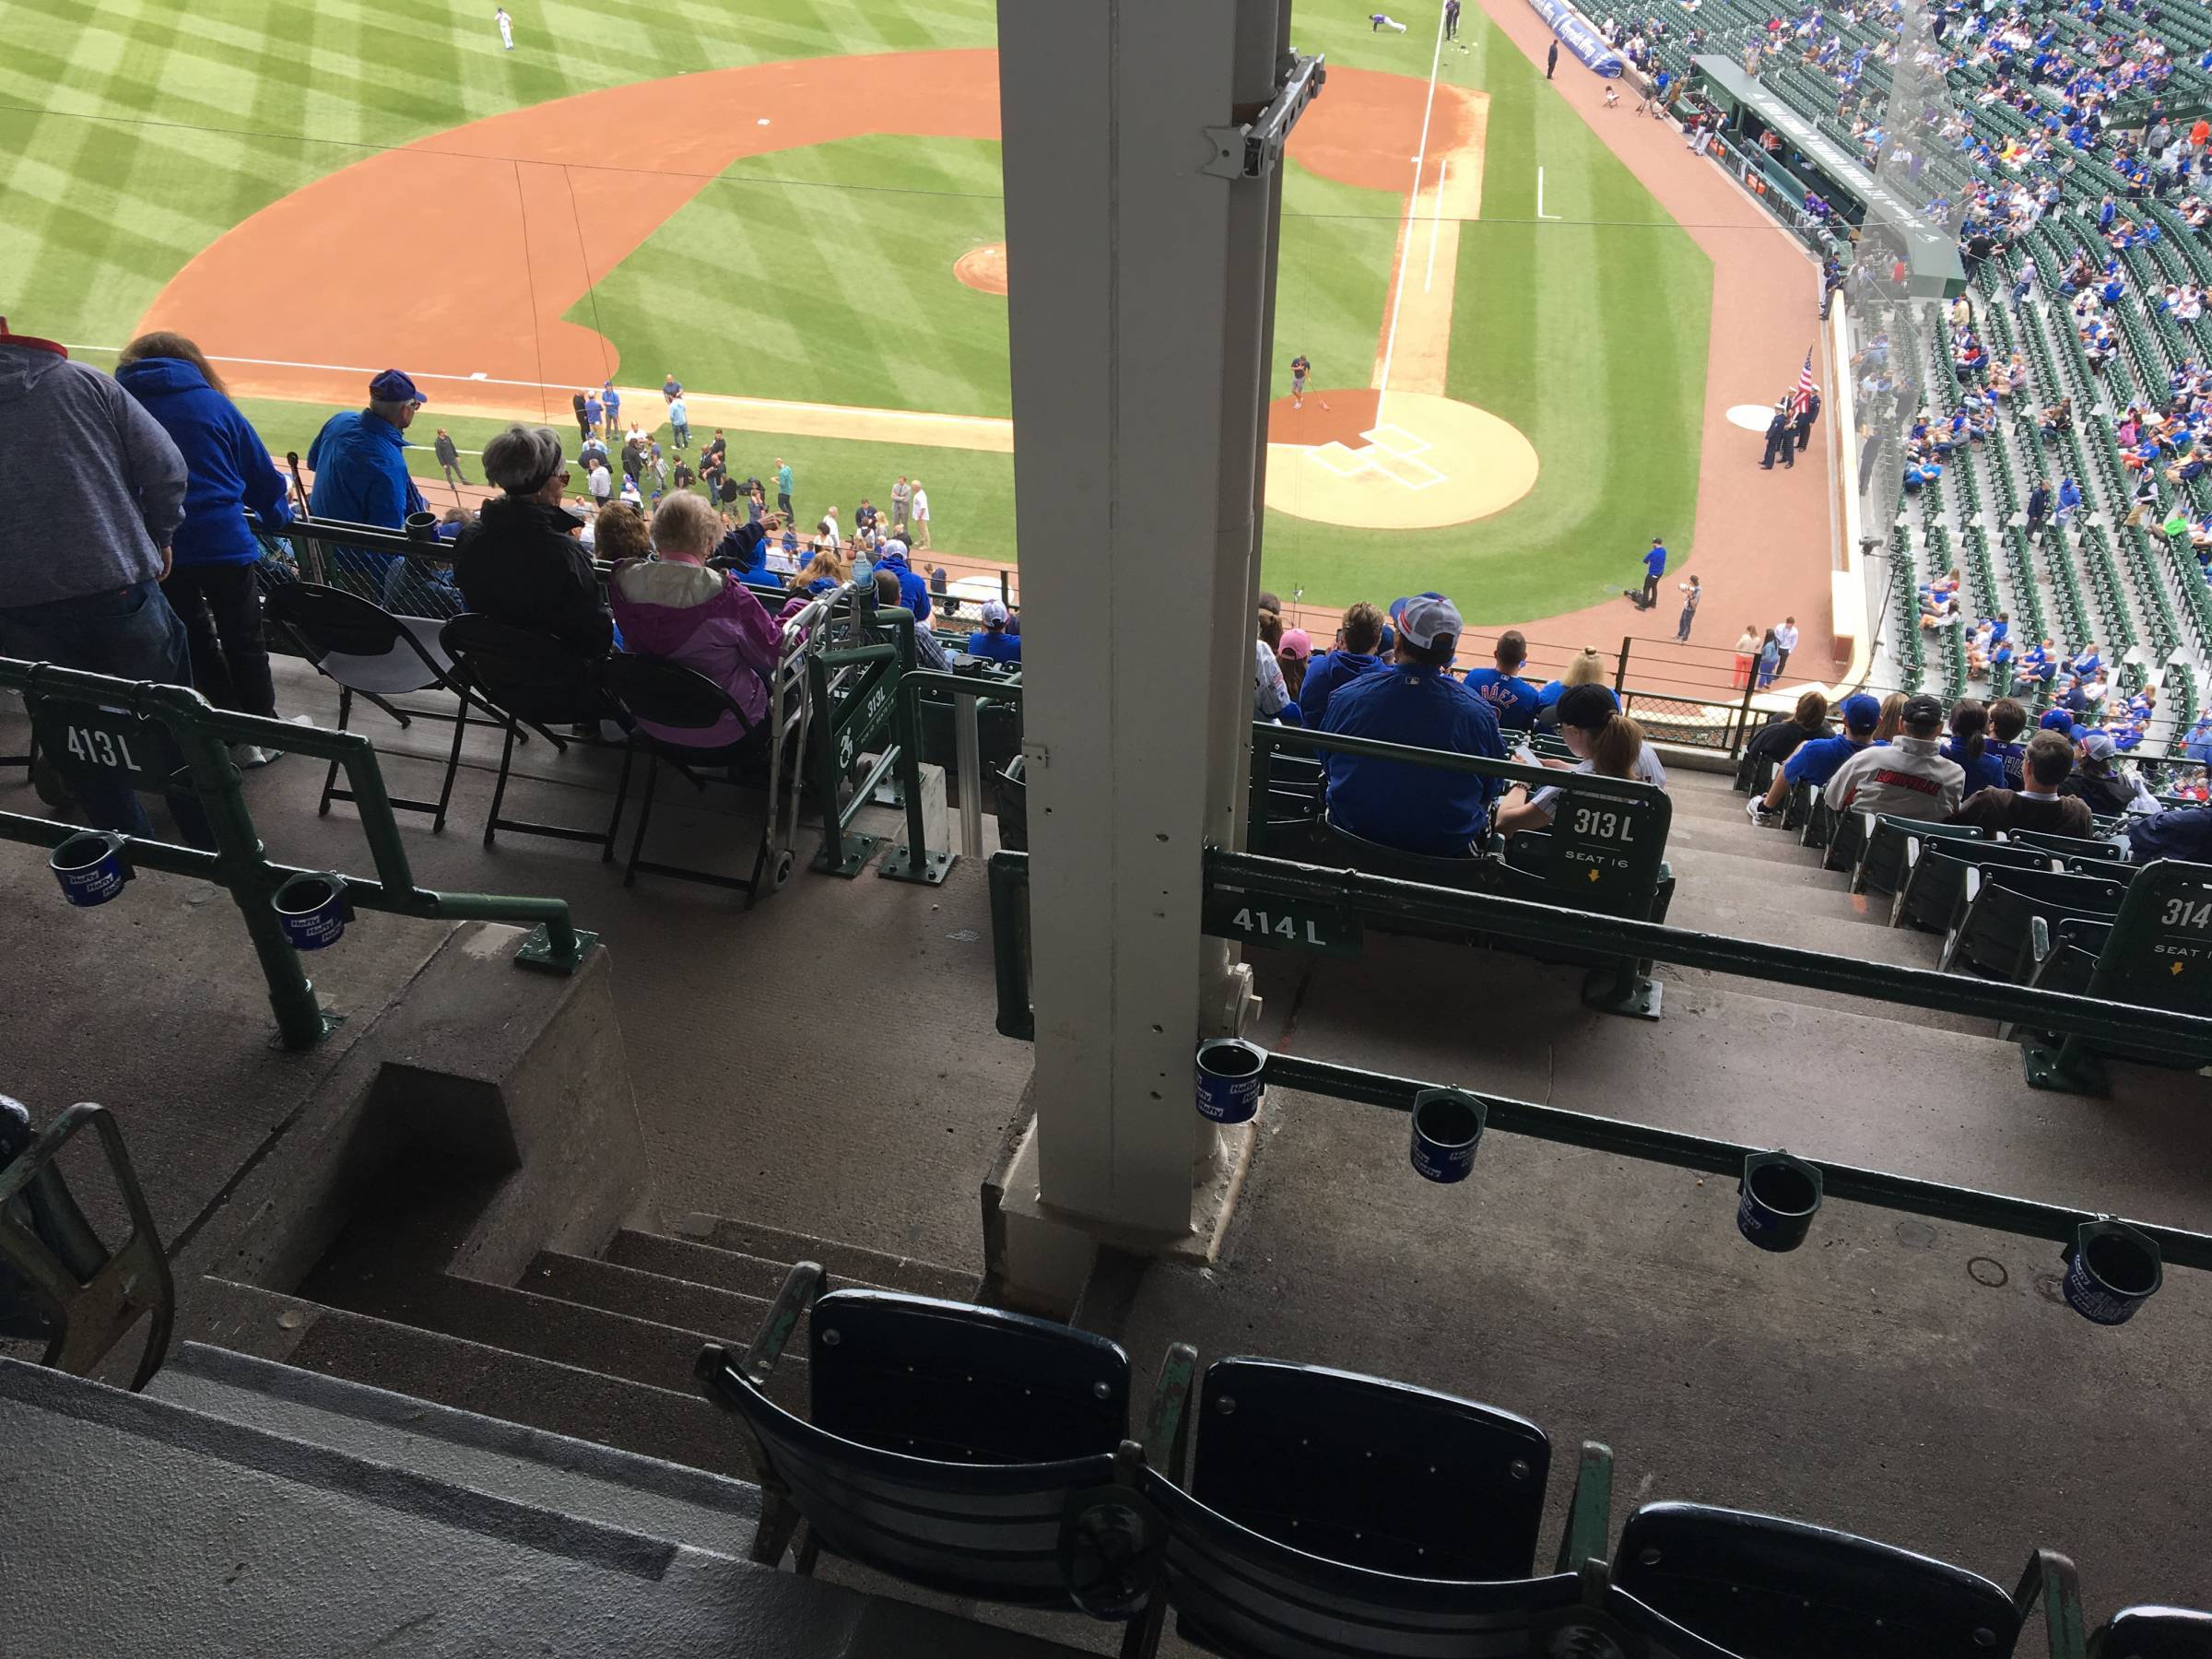 Pole in Section 414L at Wrigley Field